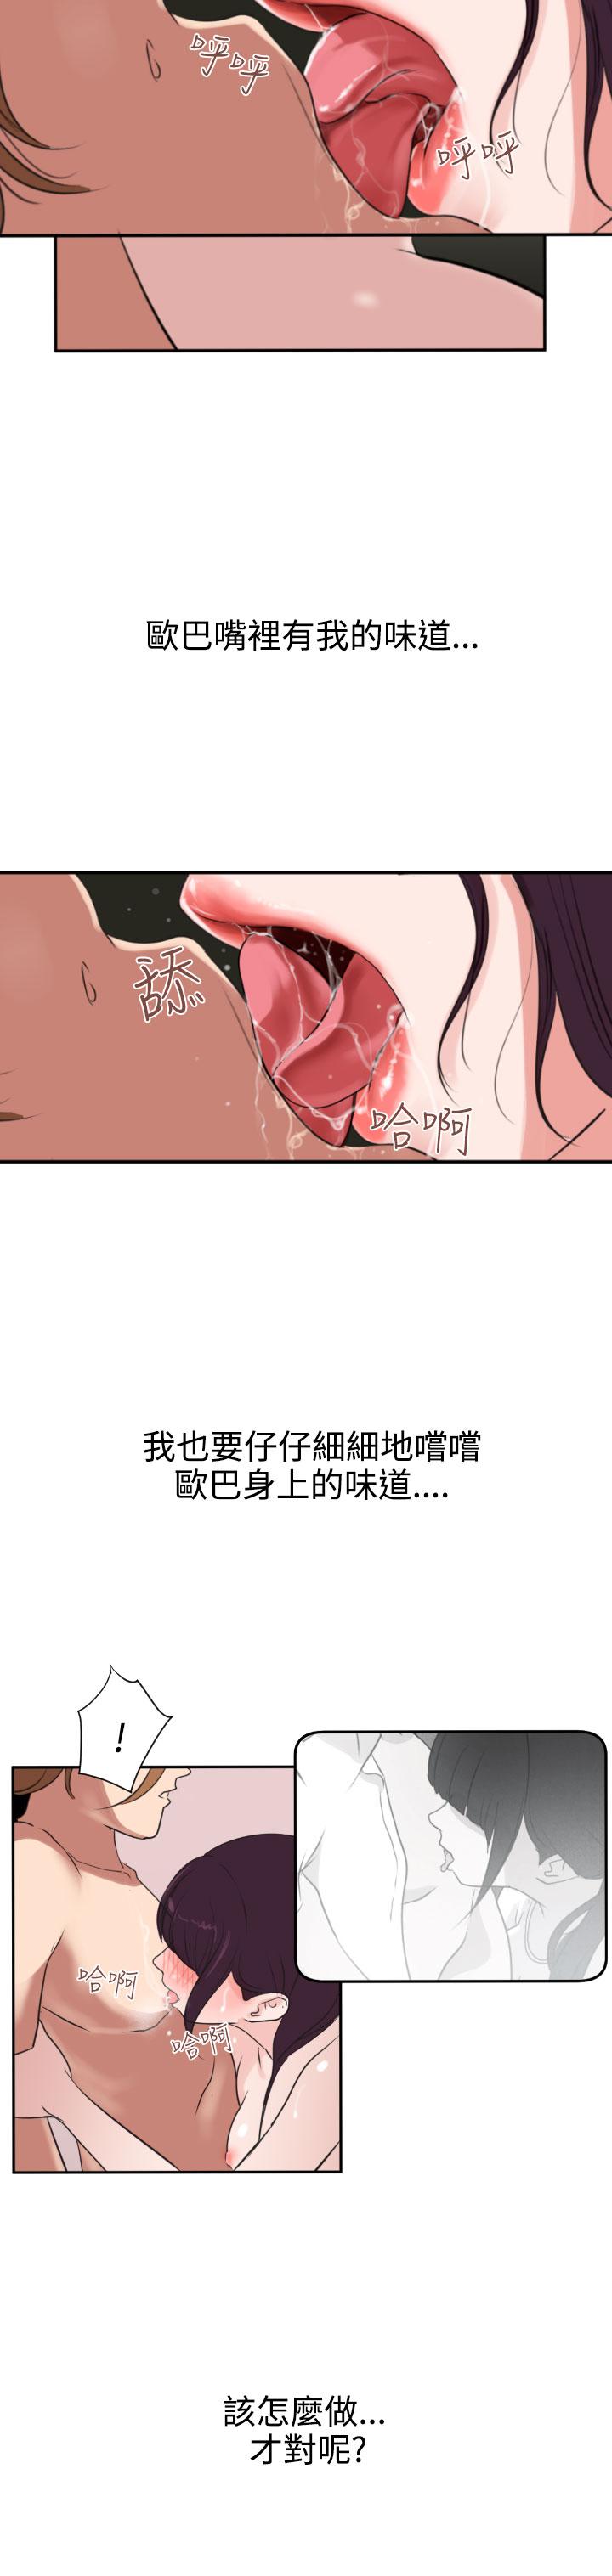 Desire King (慾求王) Ch.1-4 (chinese) 61